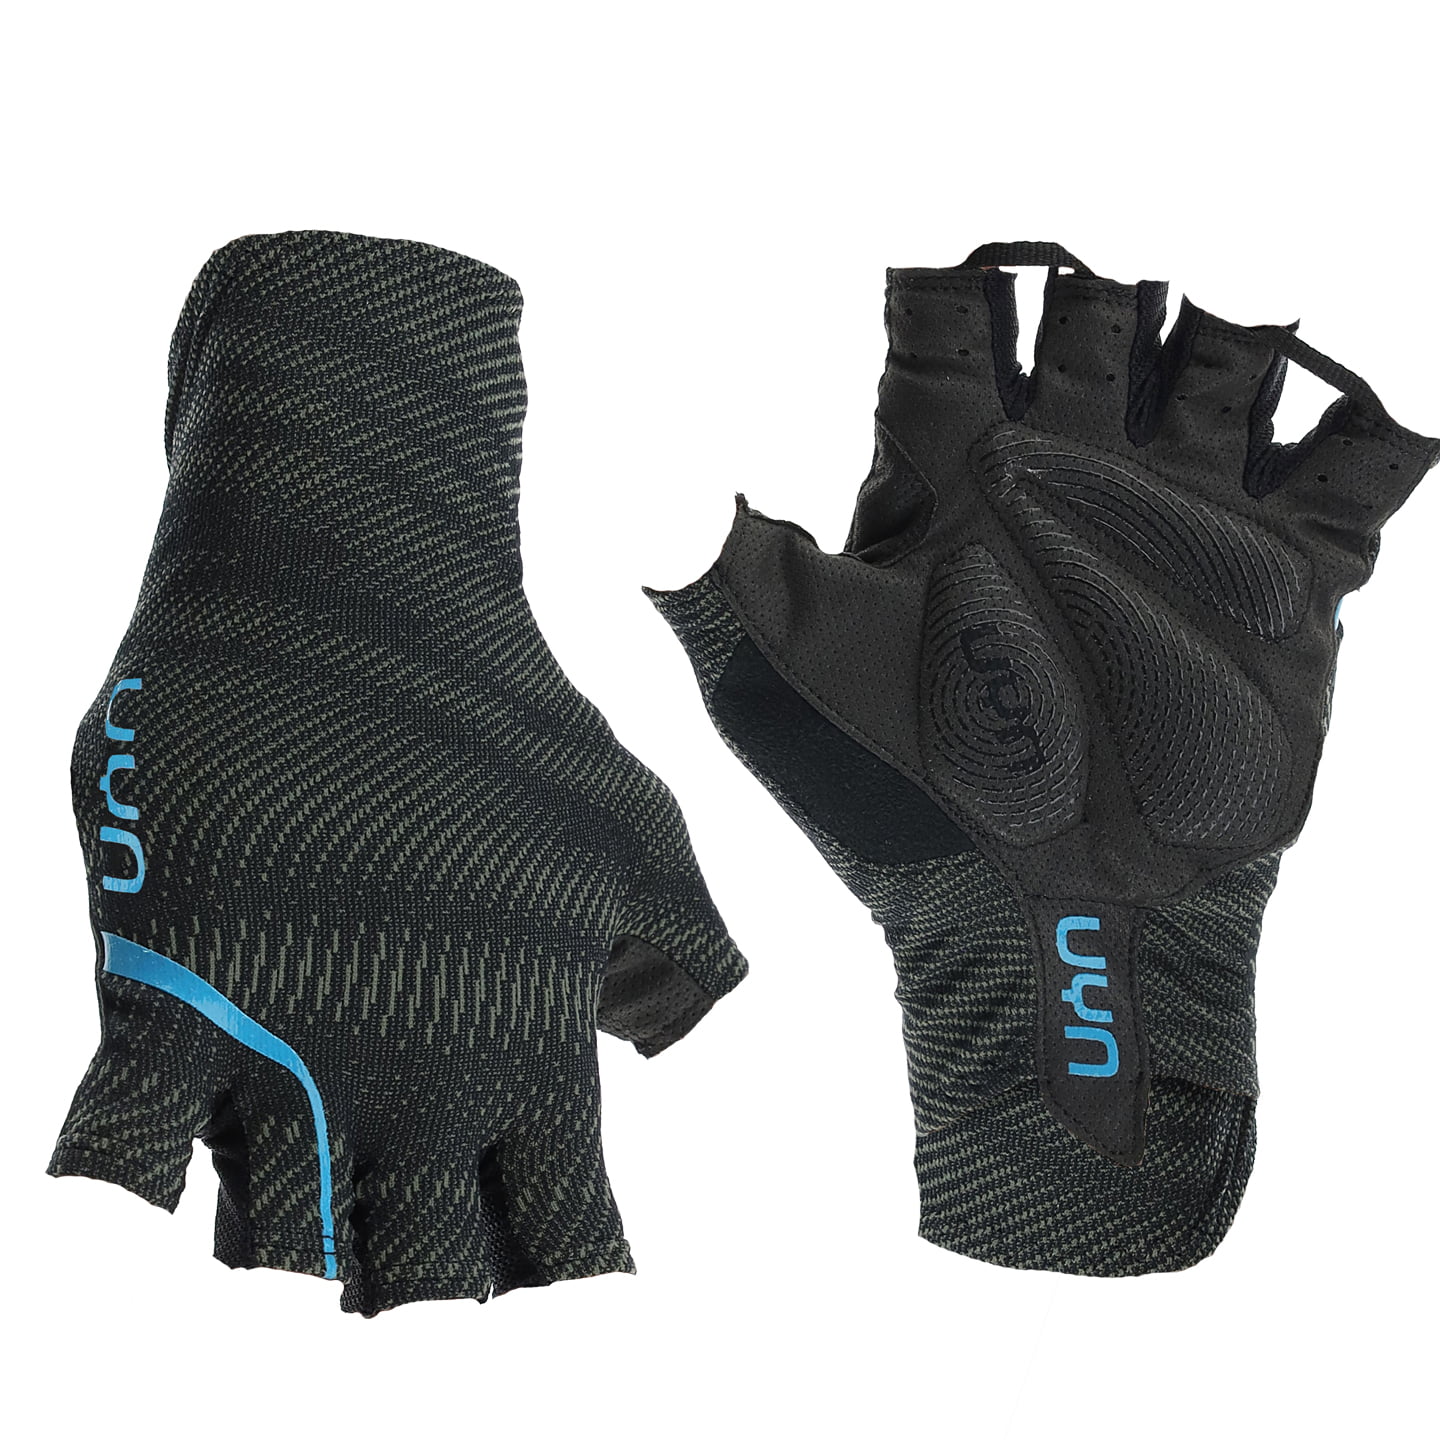 UYN All Road Gloves, for men, size M, Cycling gloves, Cycling gear